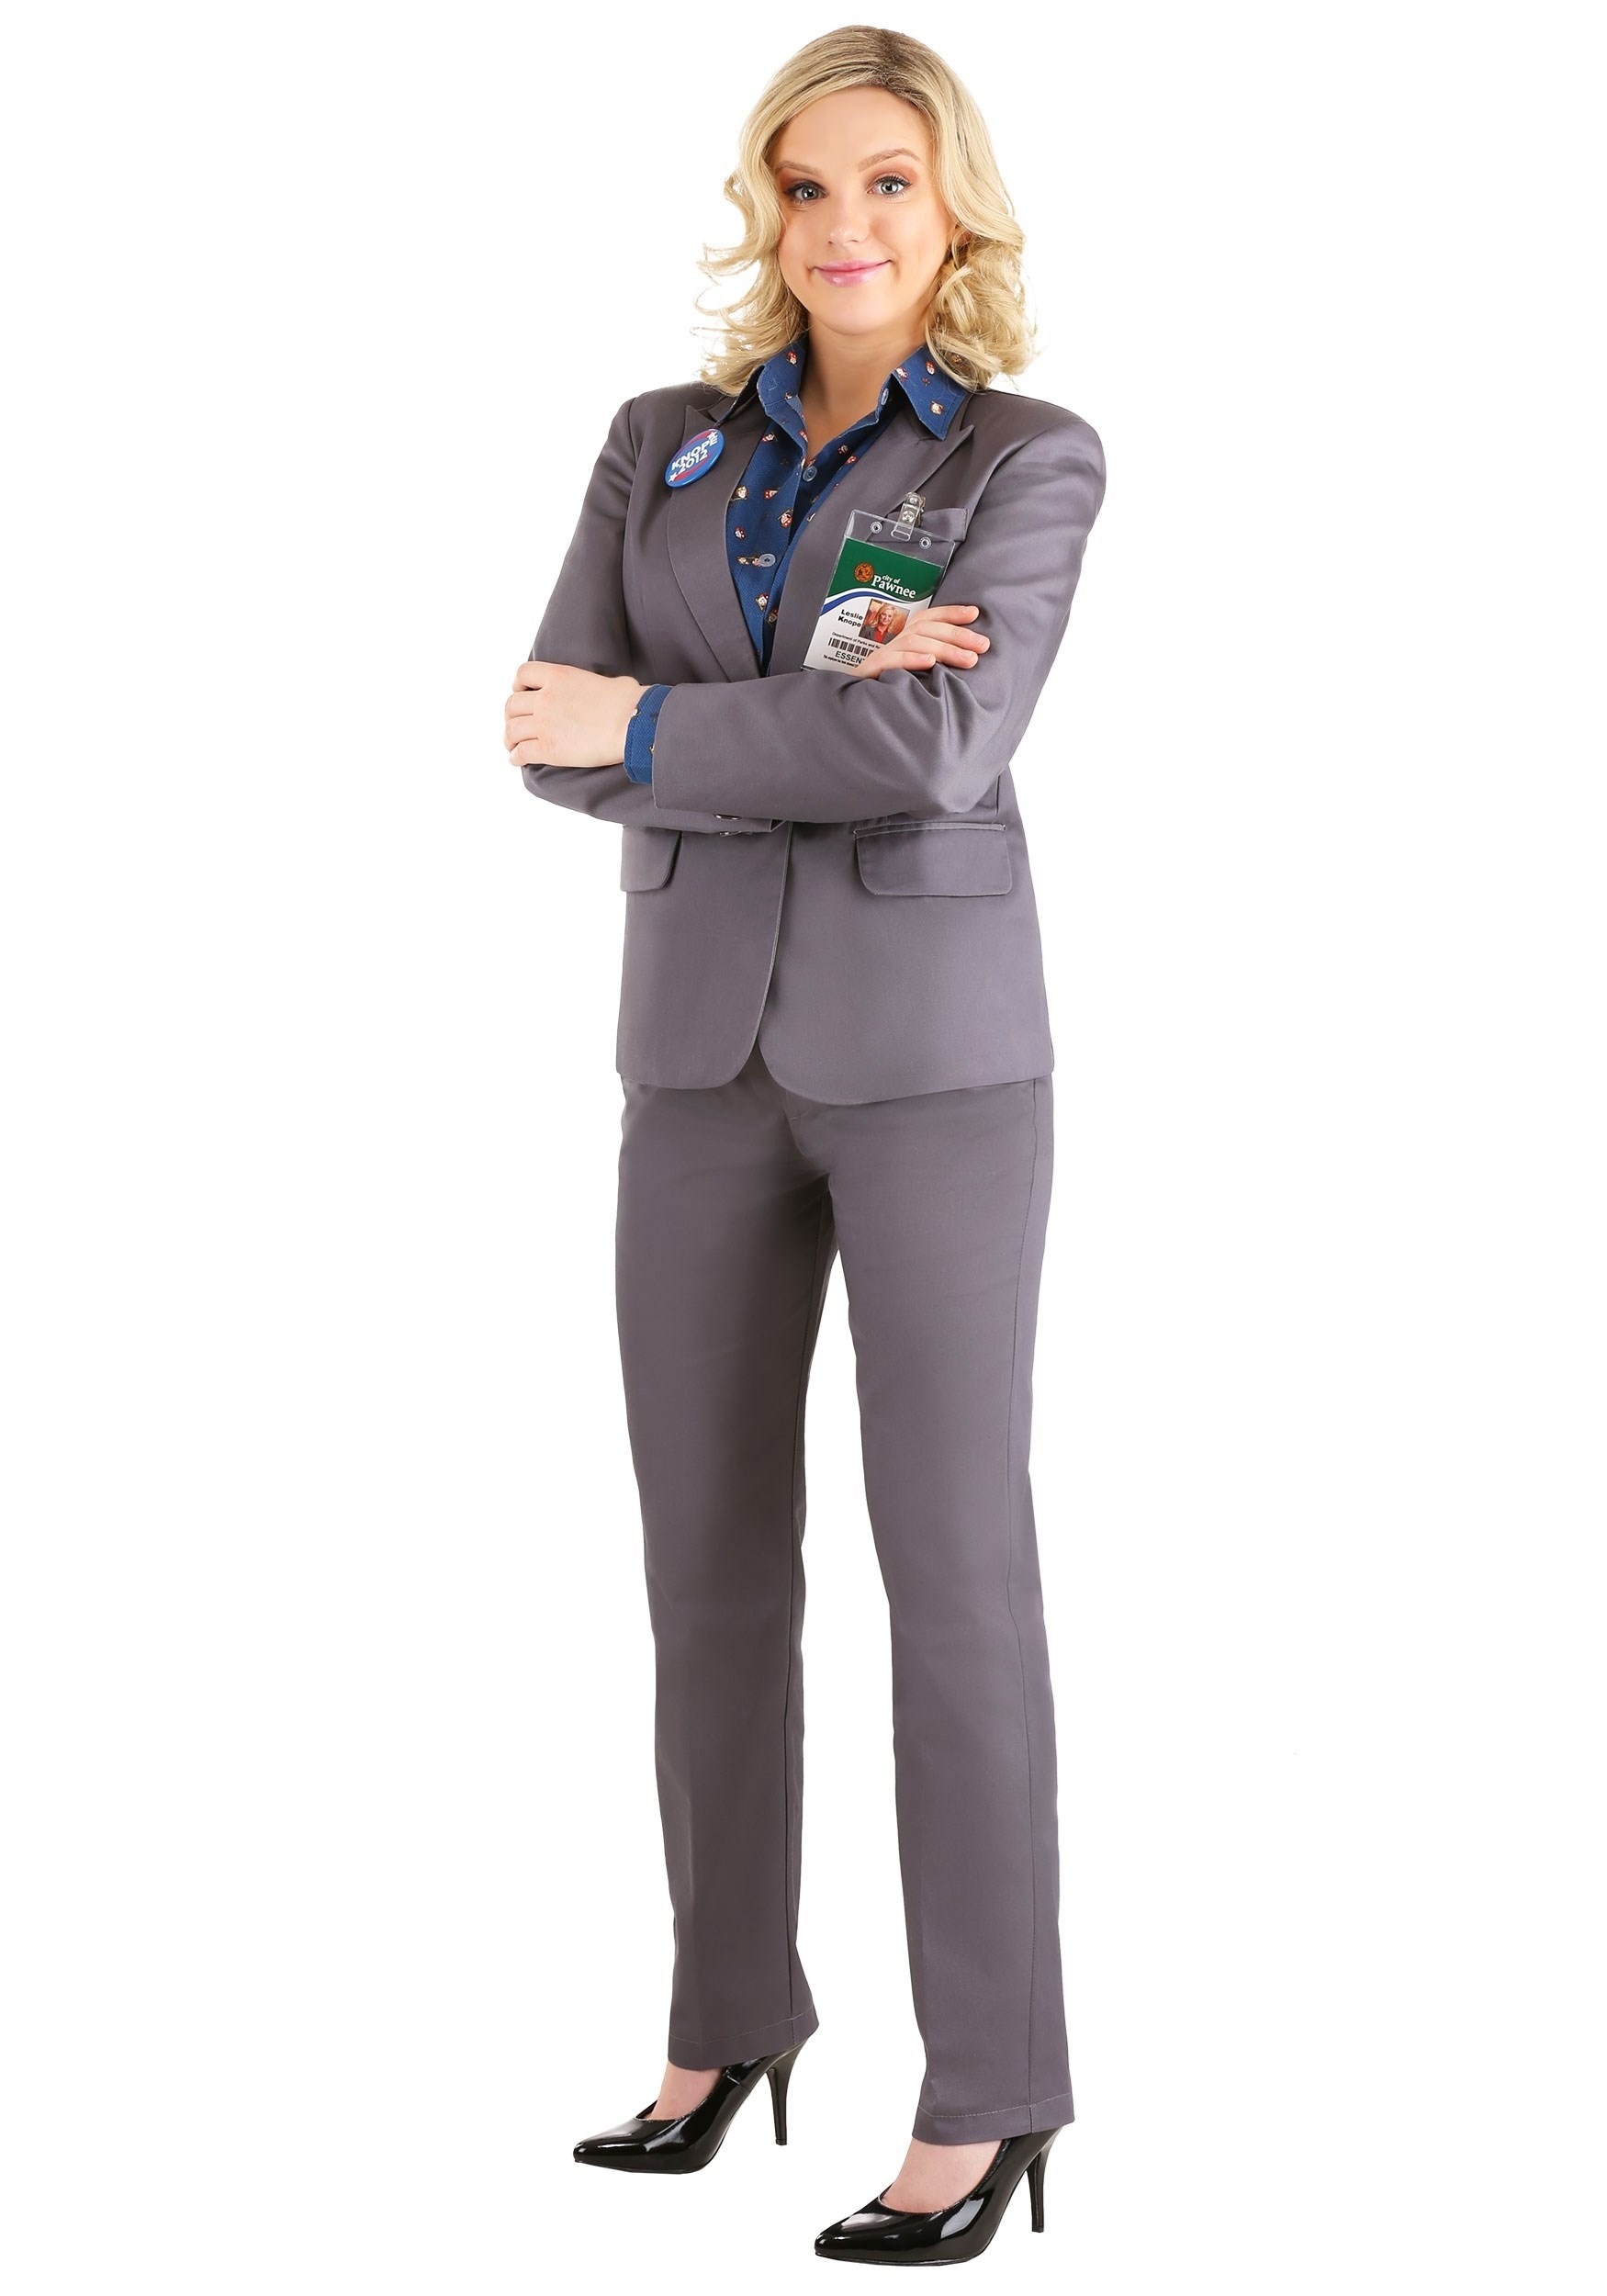 Image of Leslie Knope Parks and Recreation Costume ID FUN1480AD-M